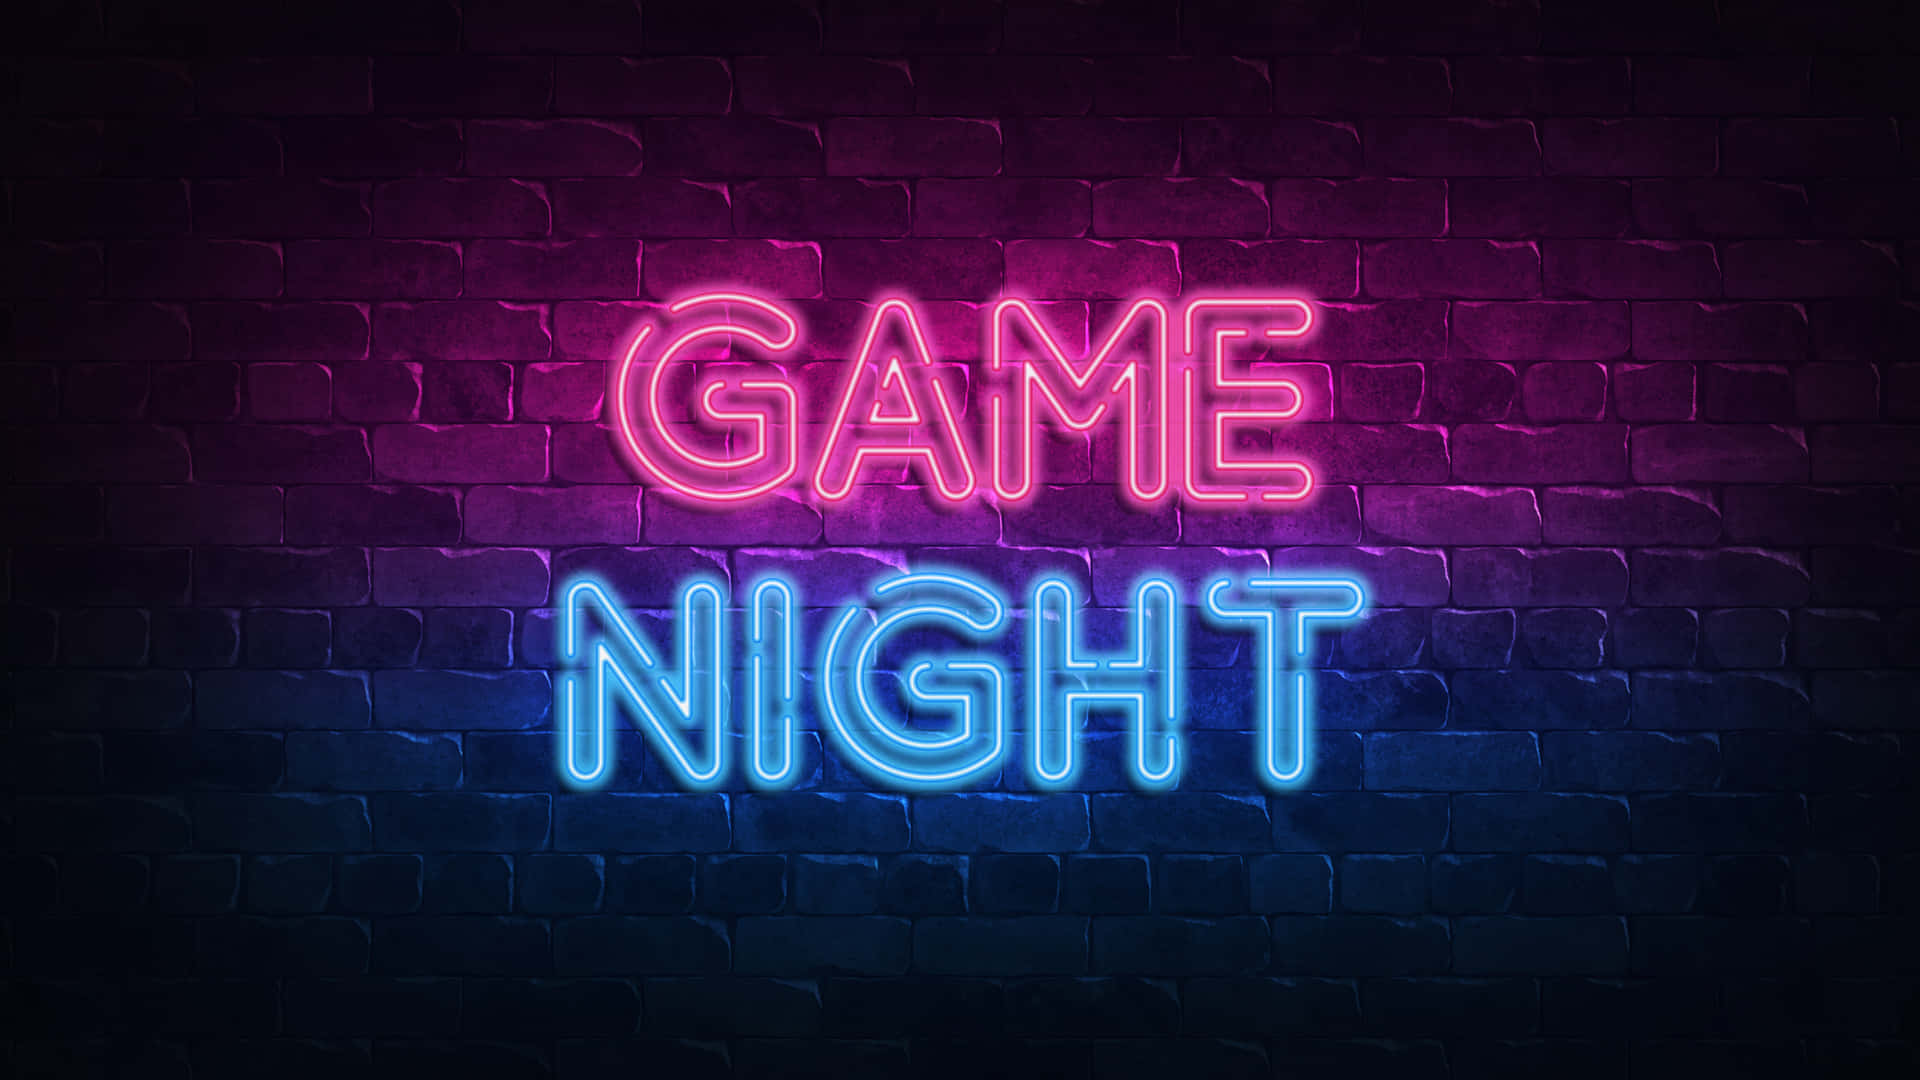 Get ready for game night and make it a night to remember!